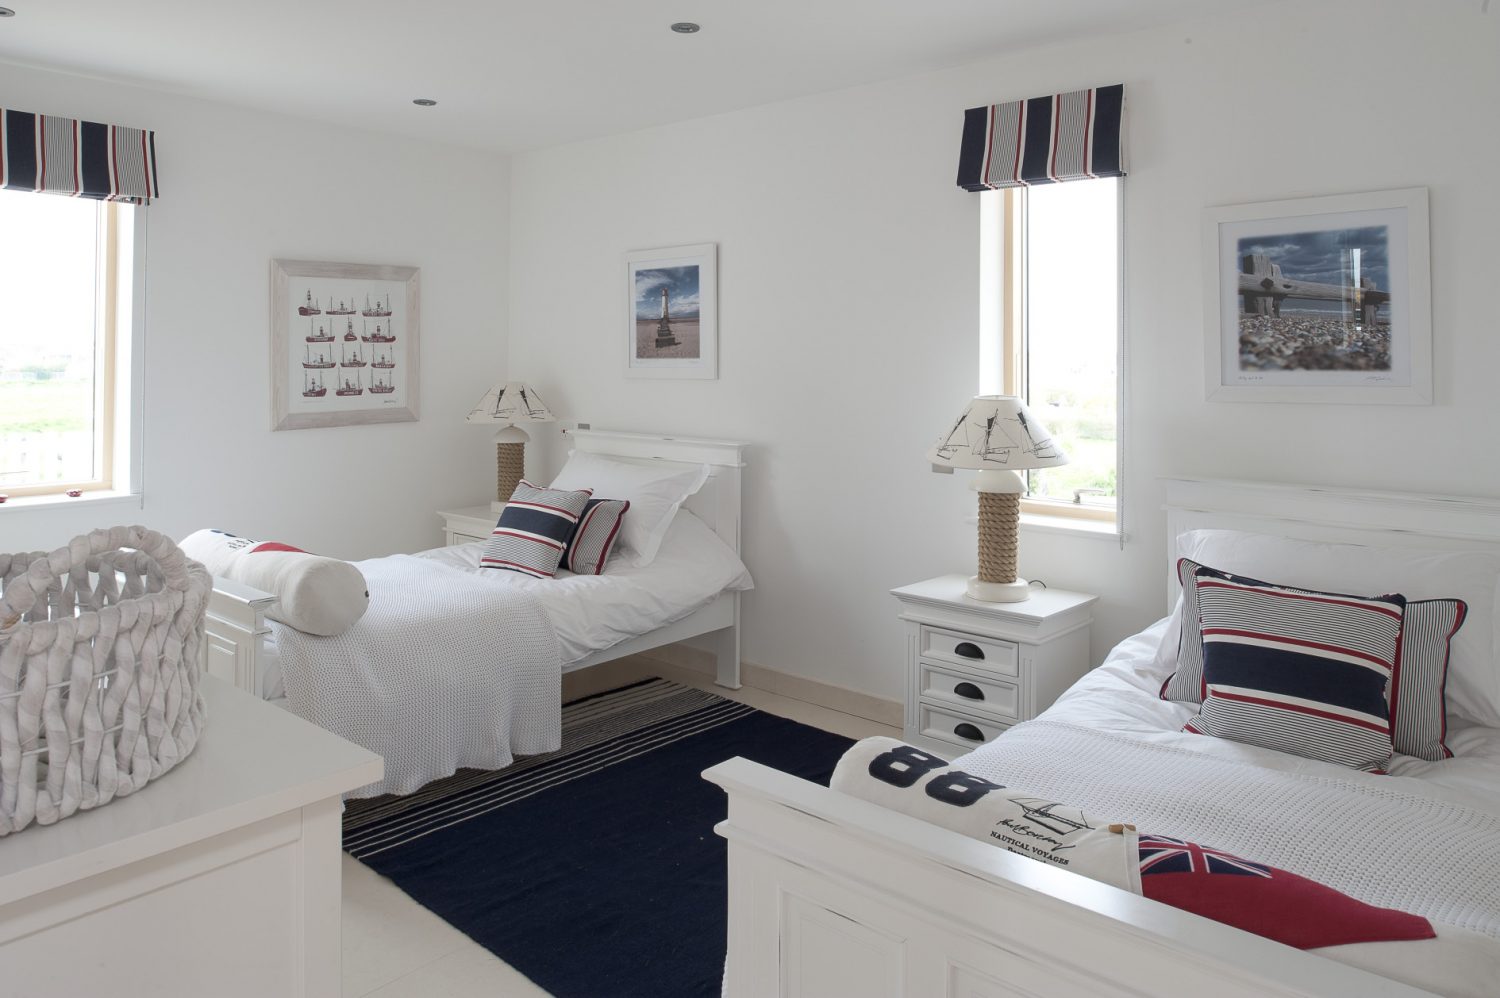 Downstairs, a corridor leads to a twin bedroom with white sleigh beds, knitted covers and red, white and navy blue striped blinds and cushions